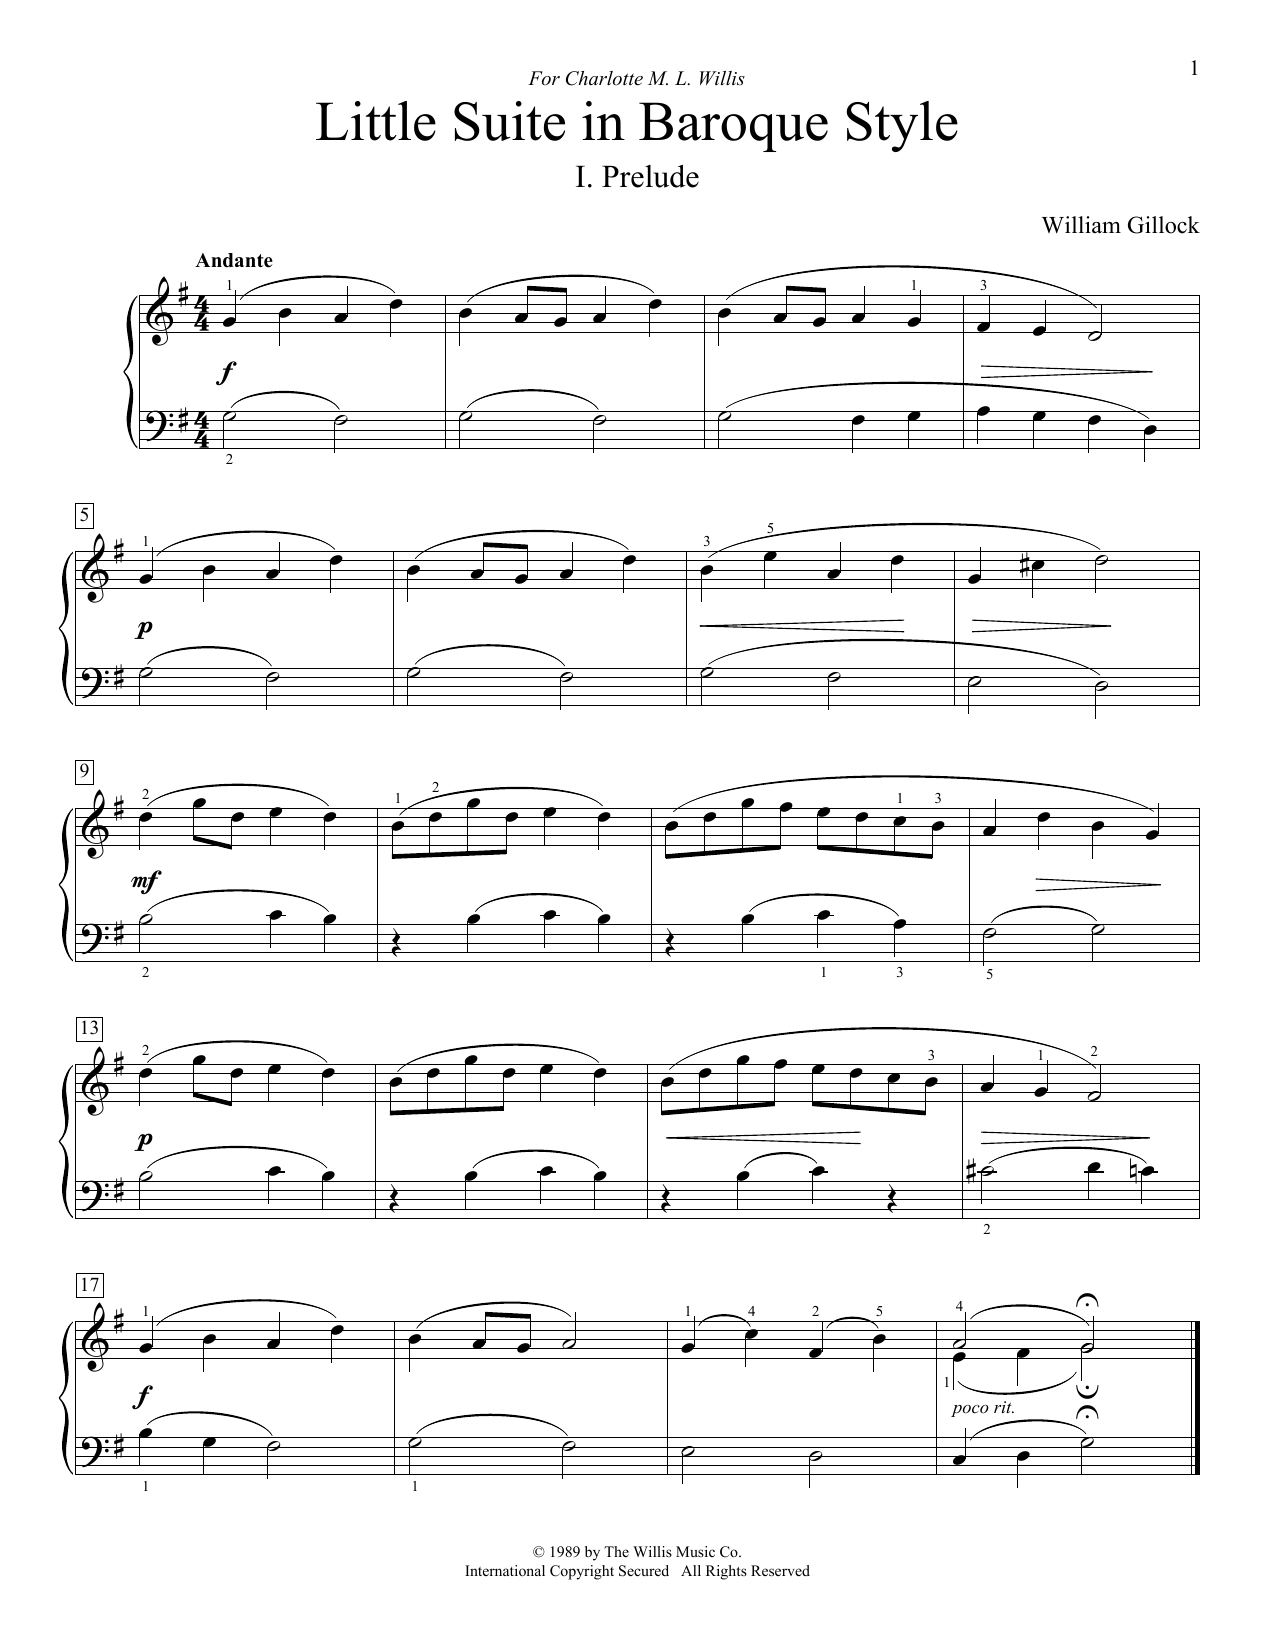 Download William Gillock Little Suite In Baroque Style Sheet Music